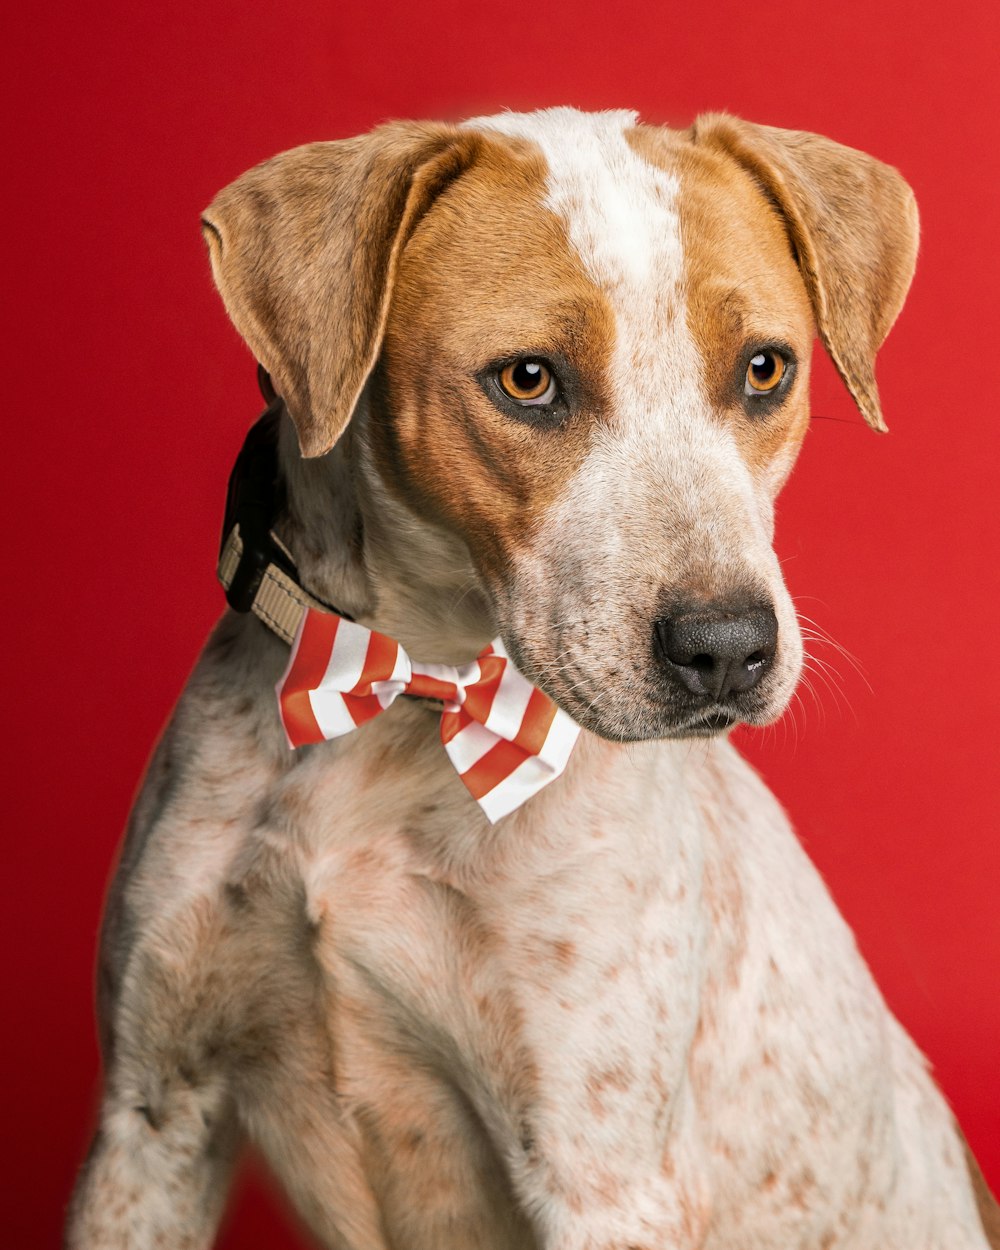 a brown and white dog wearing a red and white bow tie